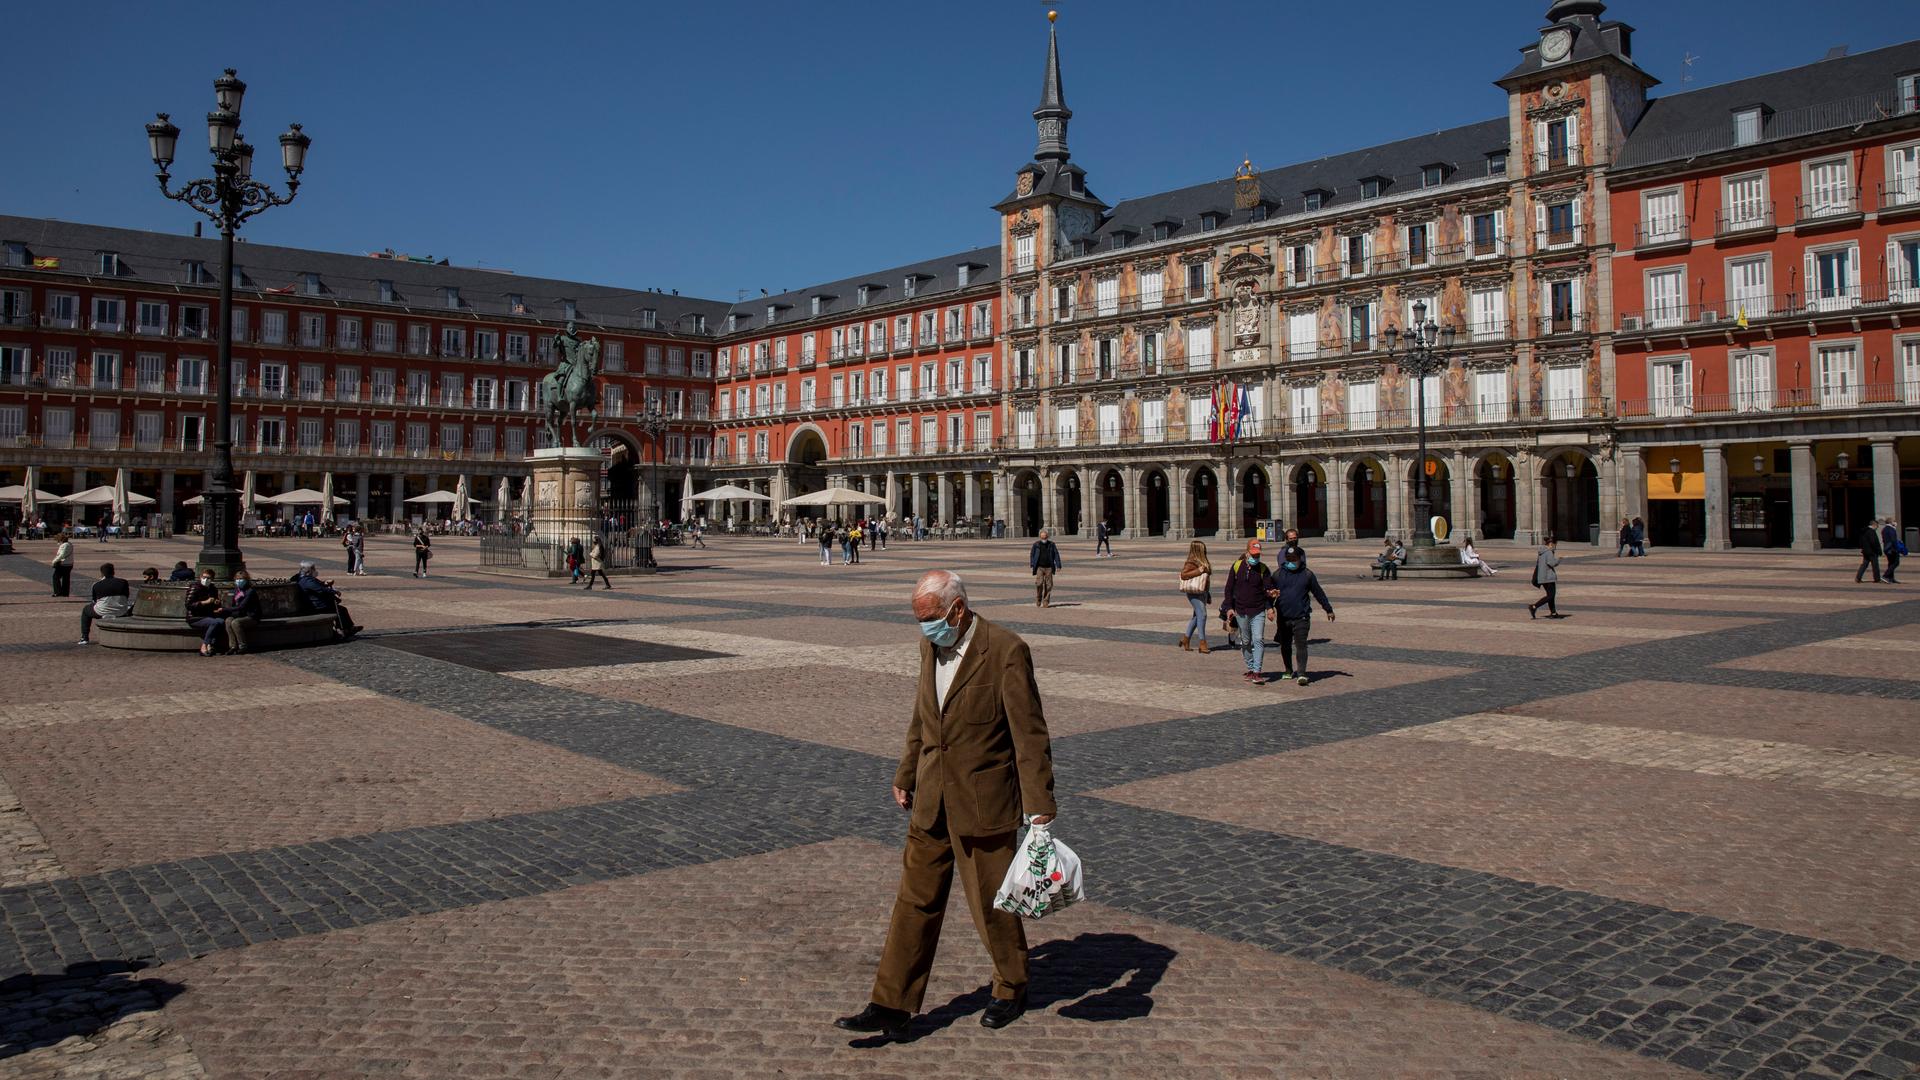 A man walks through a plaza during the day